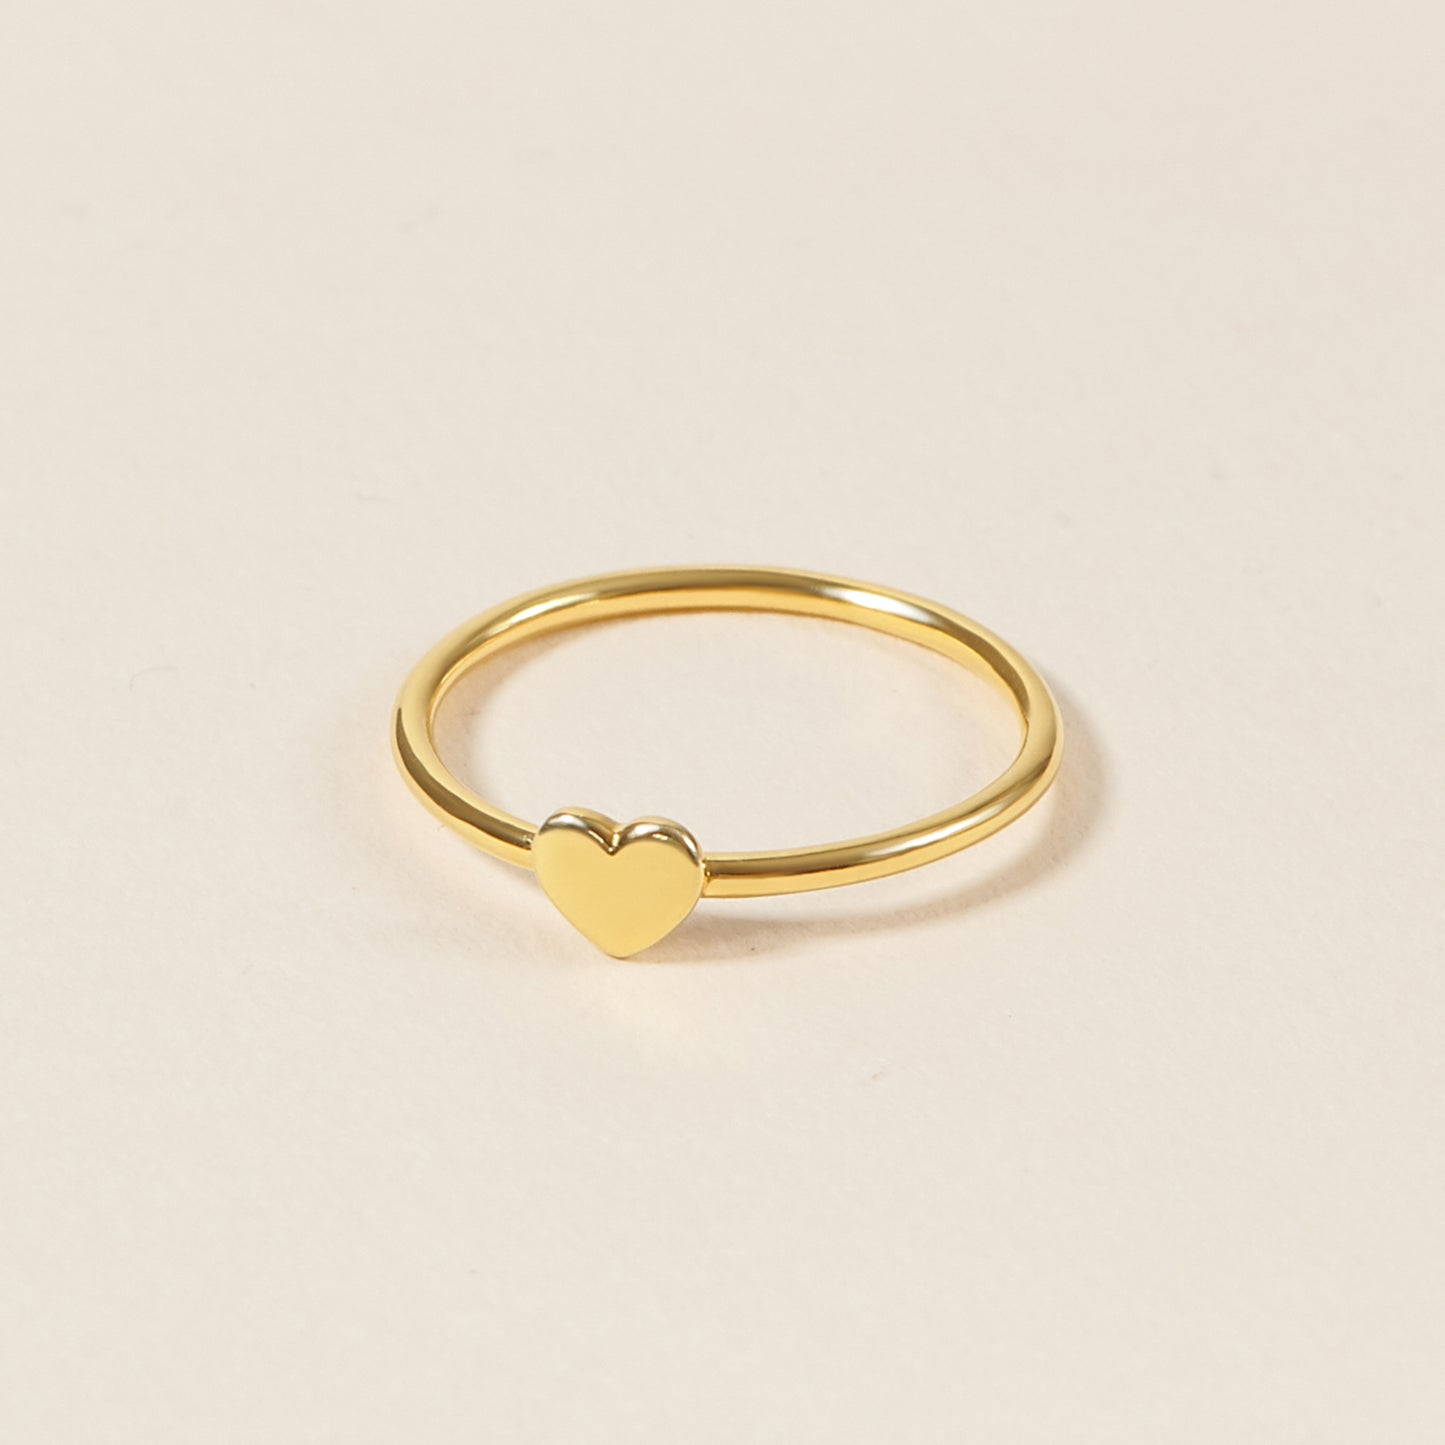 Minimalist Heart Gold Ring Silver Ring (18k gold/18k rose gold/925 sterling silver)